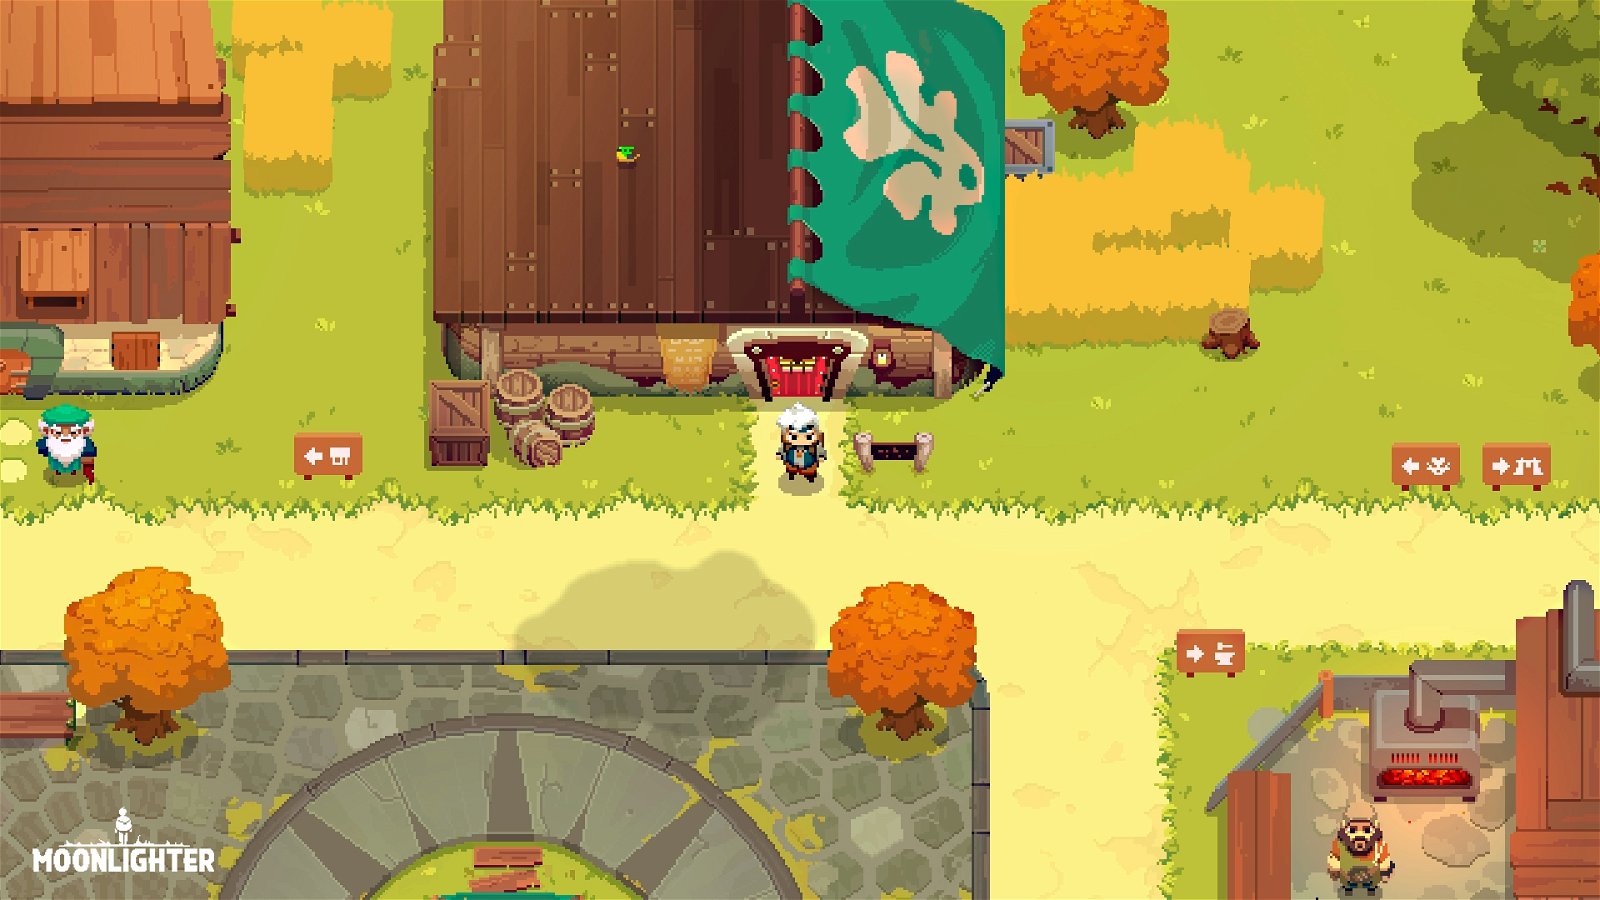 Moonlighter Review - Fire Sale 2